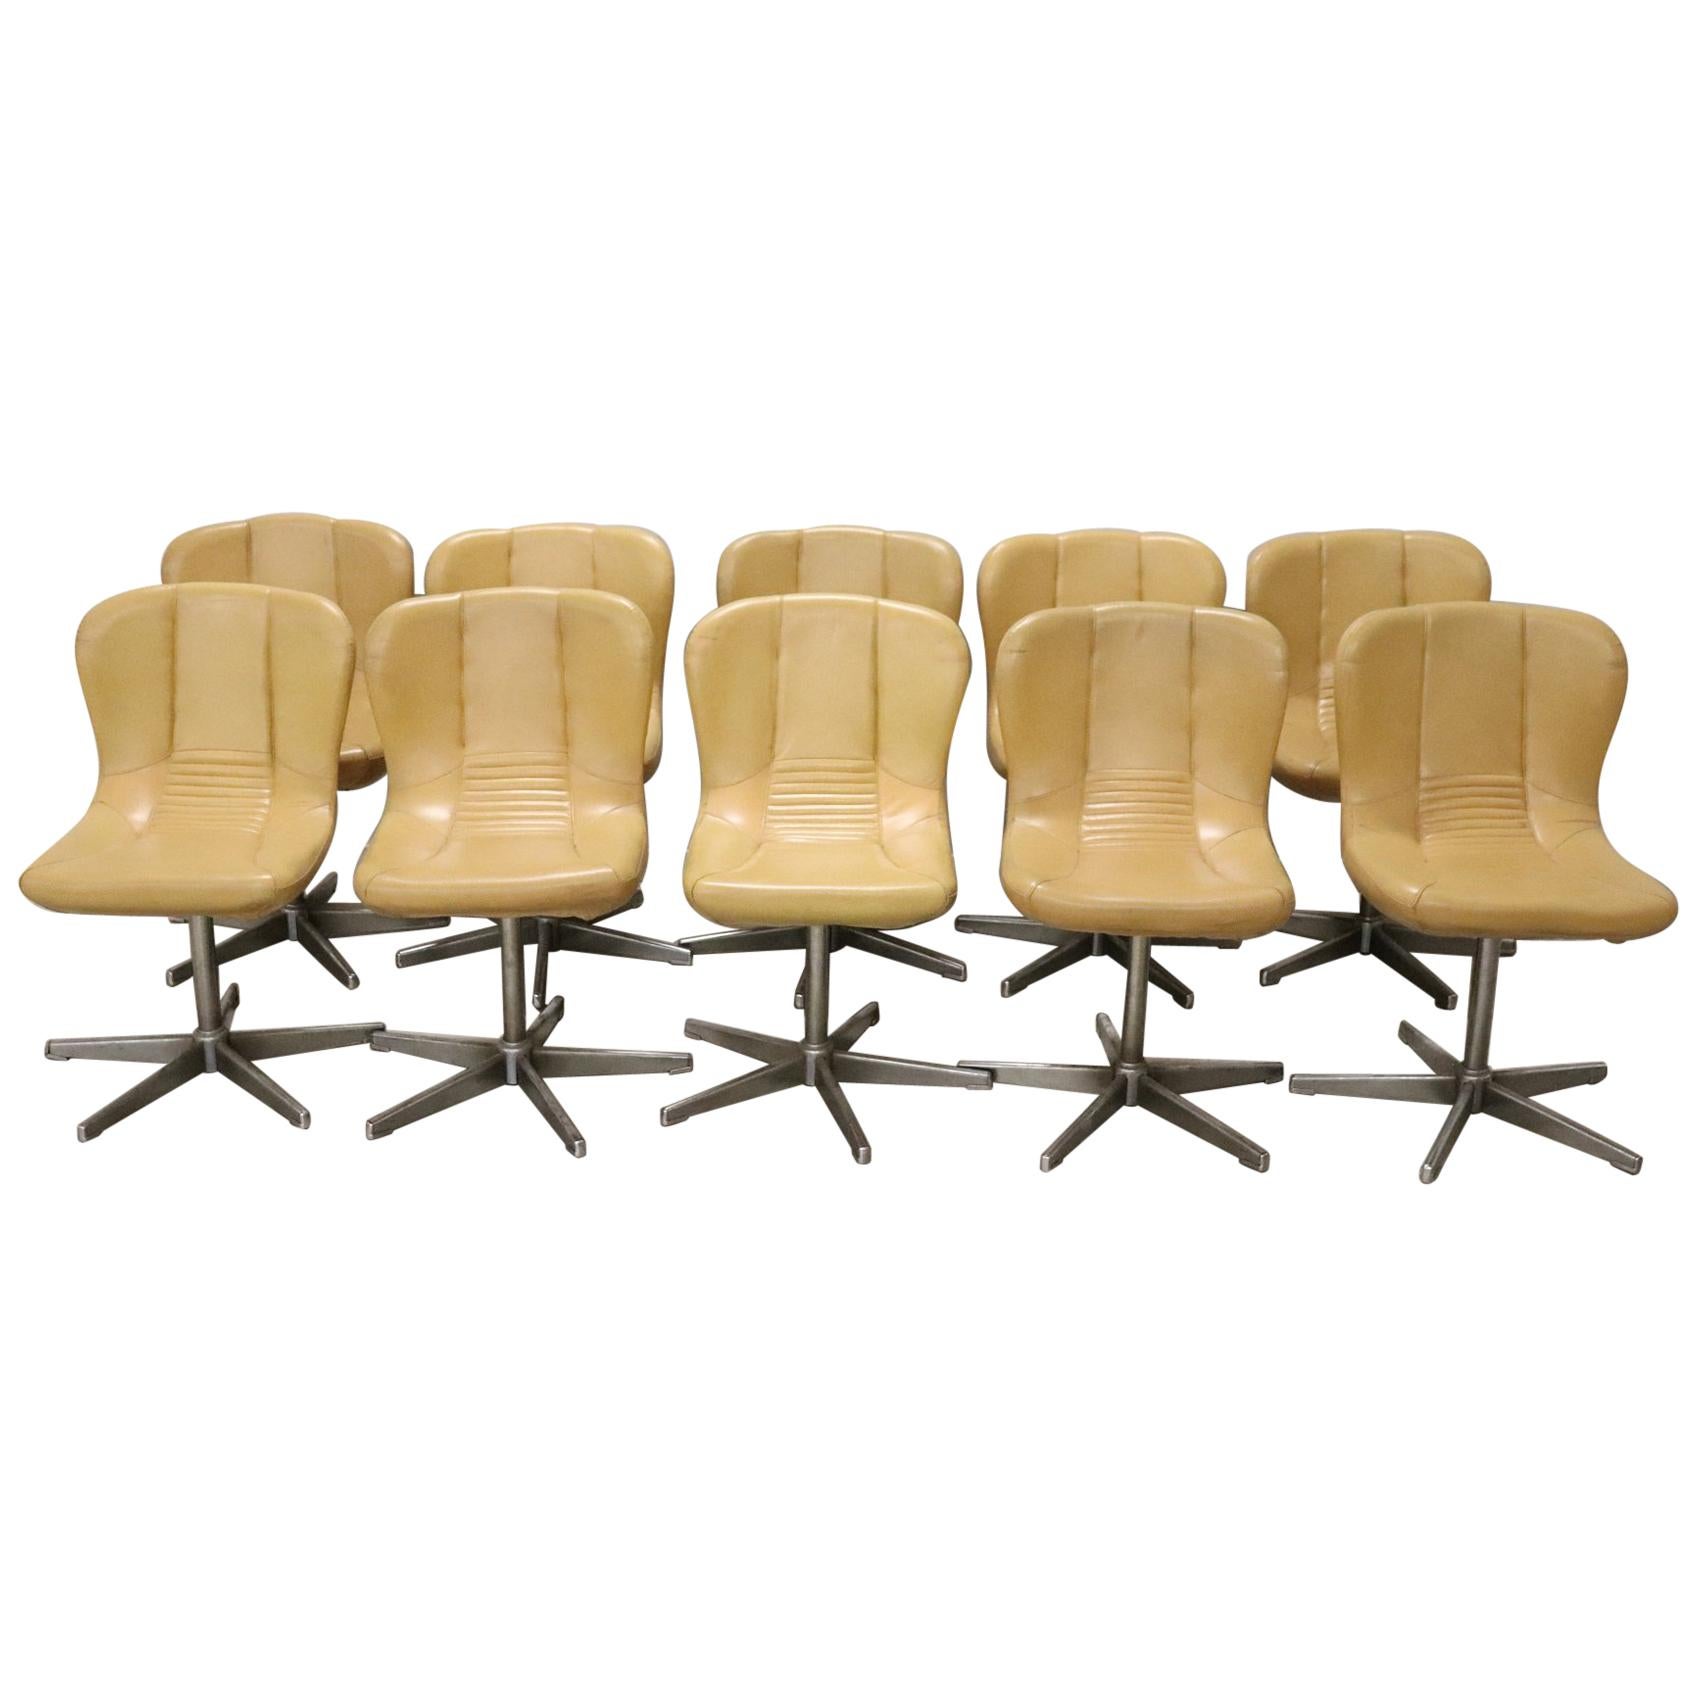 20th Century Italian Design Chromed Metal and Leather Set of 10 Armchairs, 1960s